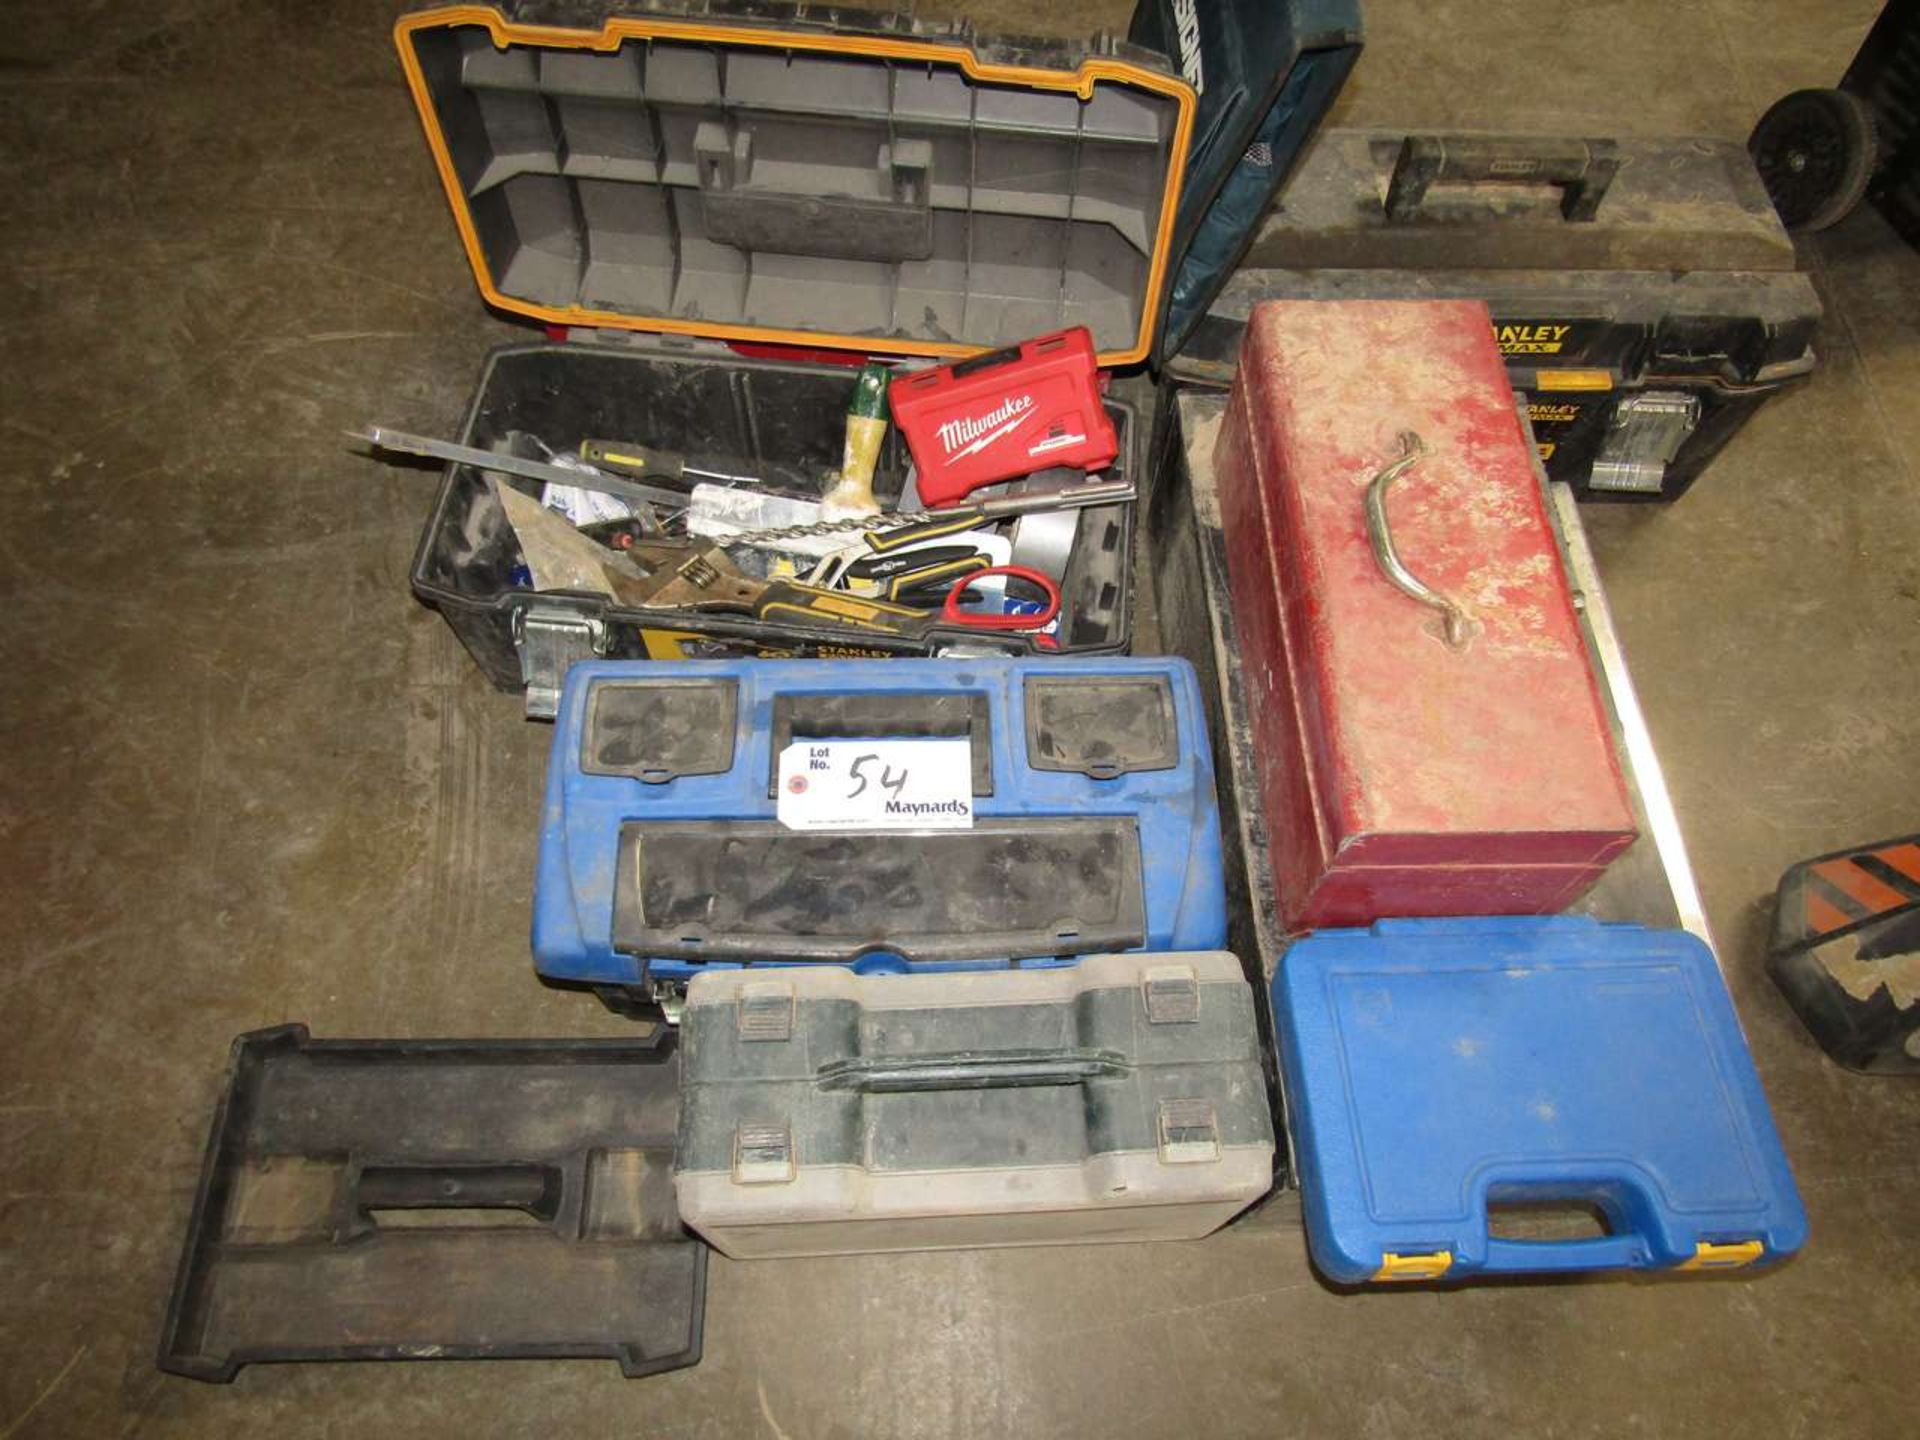 Approx.: 6 Tool Boxes/Cases